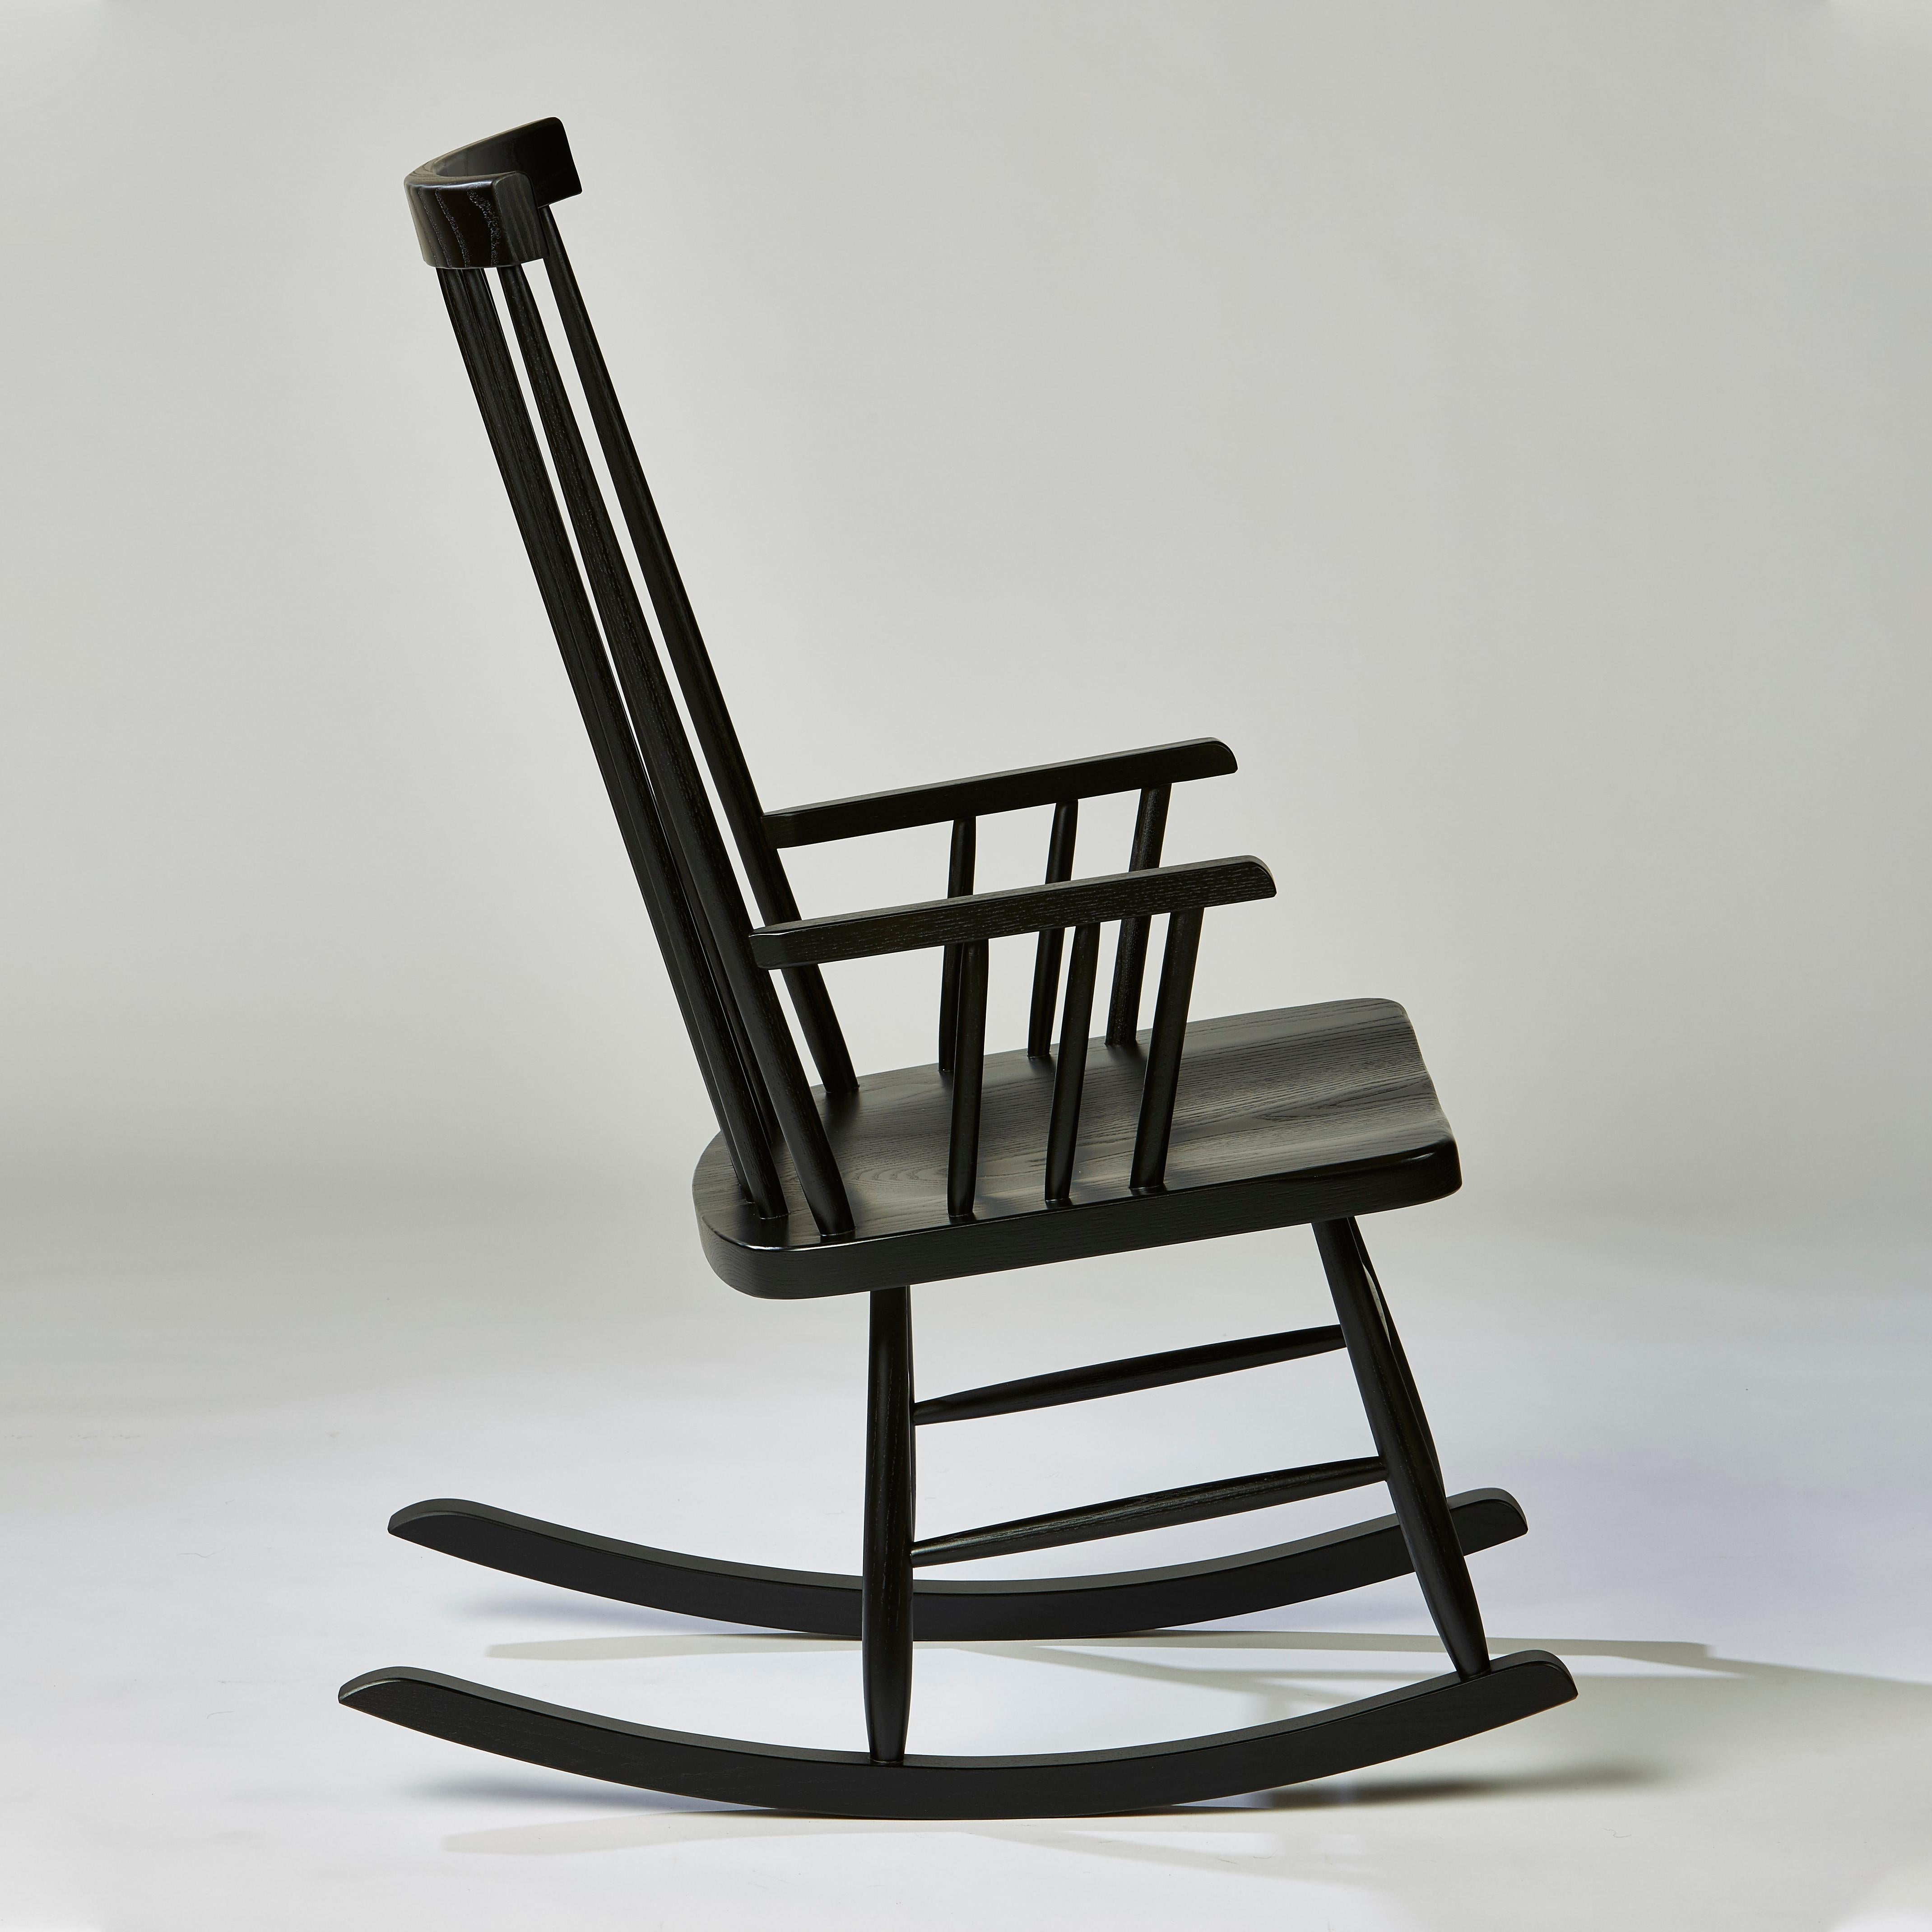 Originally designed by Mel Smilow in 1960 and officially reintroduced by his daughter Judy Smilow in 2016, the Classic rocking chair was featured in the American Pavilion at Expo 1967 and has withstood the test of time. The simplistic beauty, fine